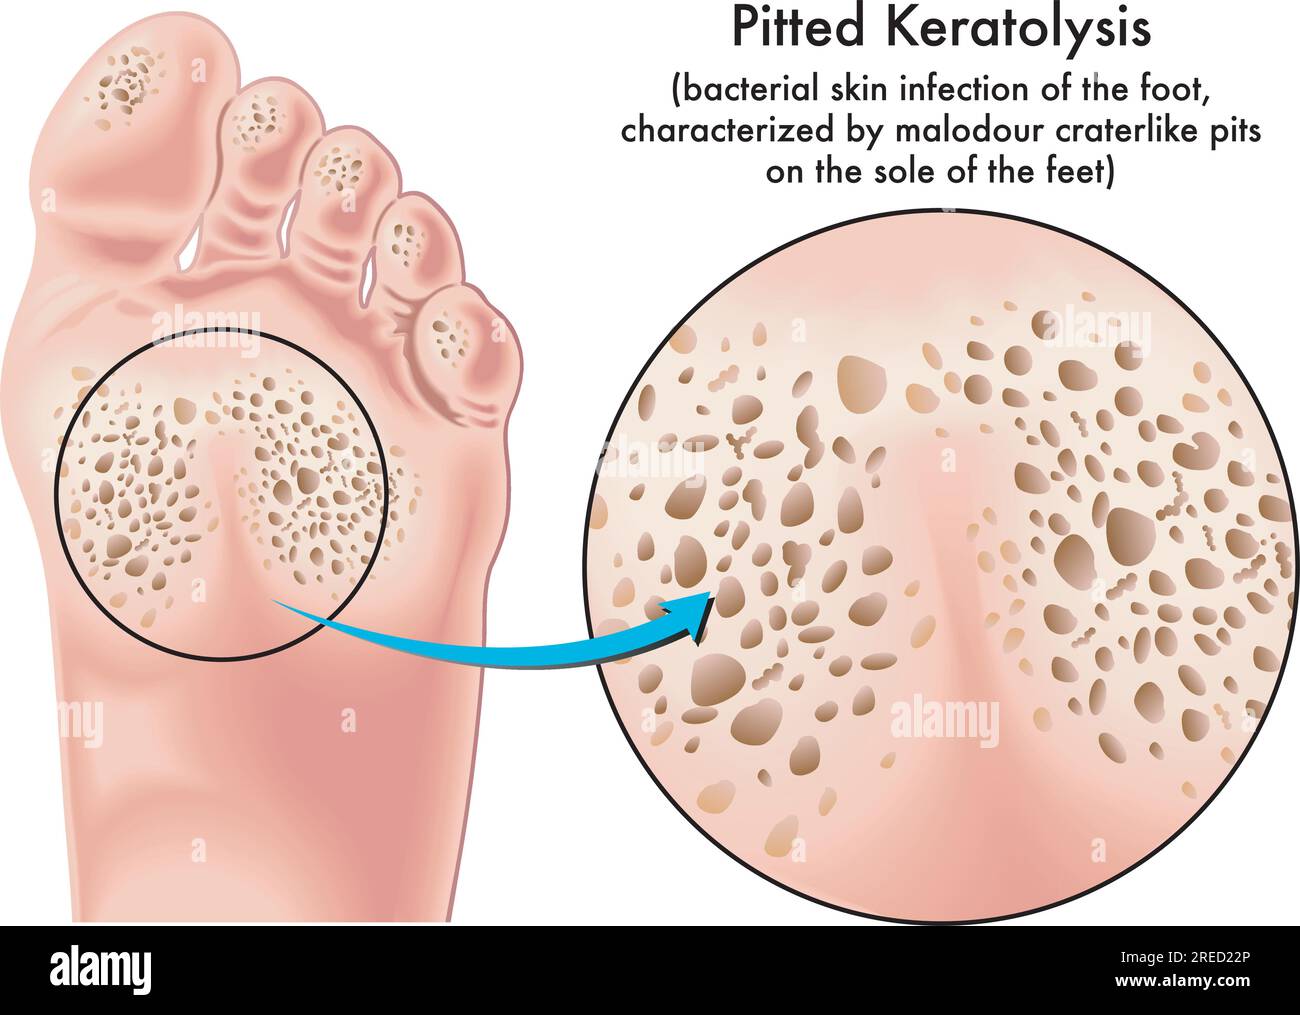 Medical illustration of symptoms of pitted keratolysis, a bacterial skin infection of the foot. Stock Vector